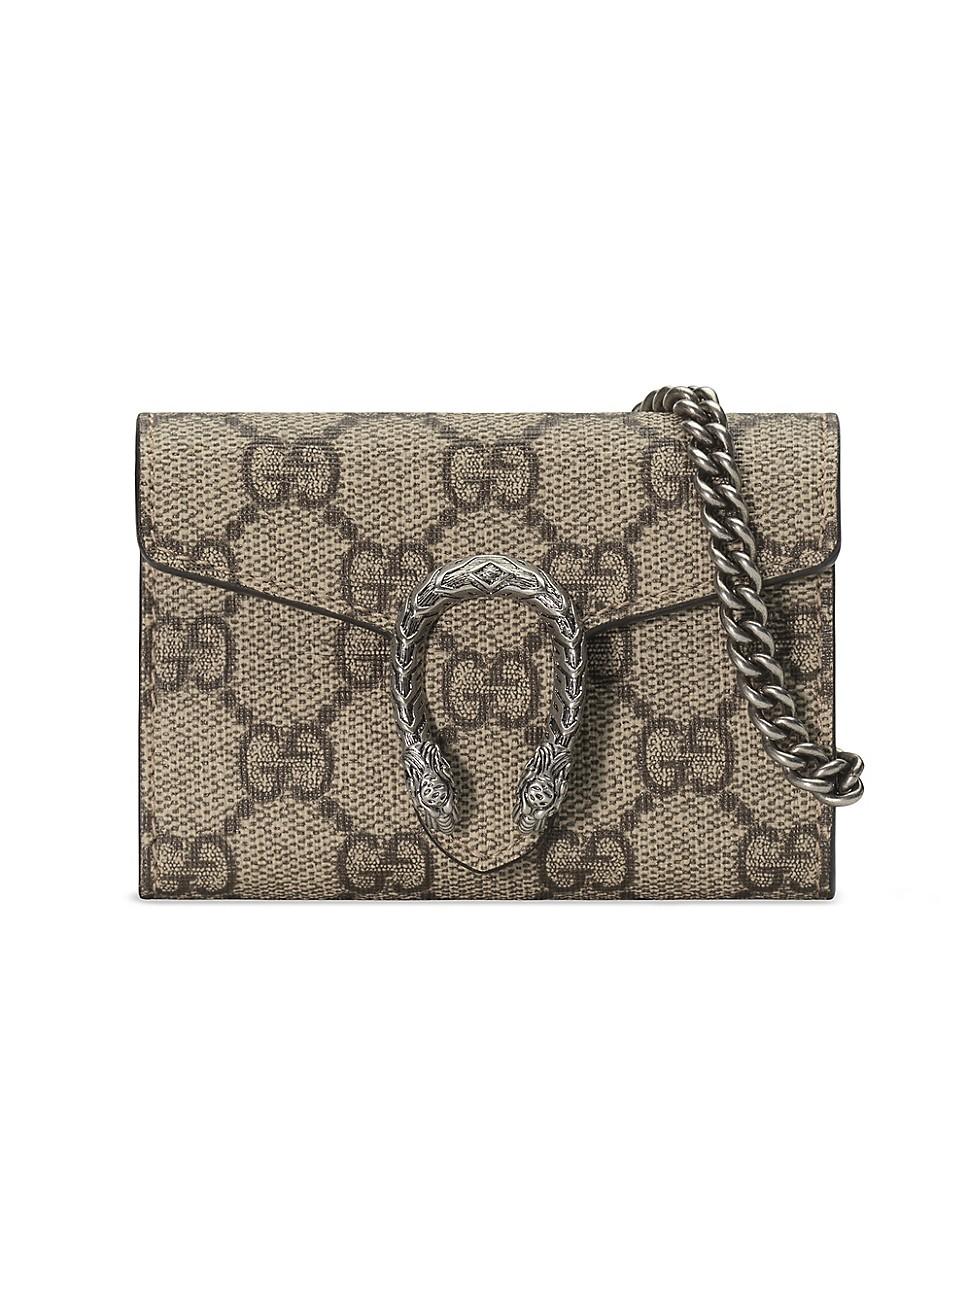 Gucci Dionysus GG Supreme chain wallet at the best price